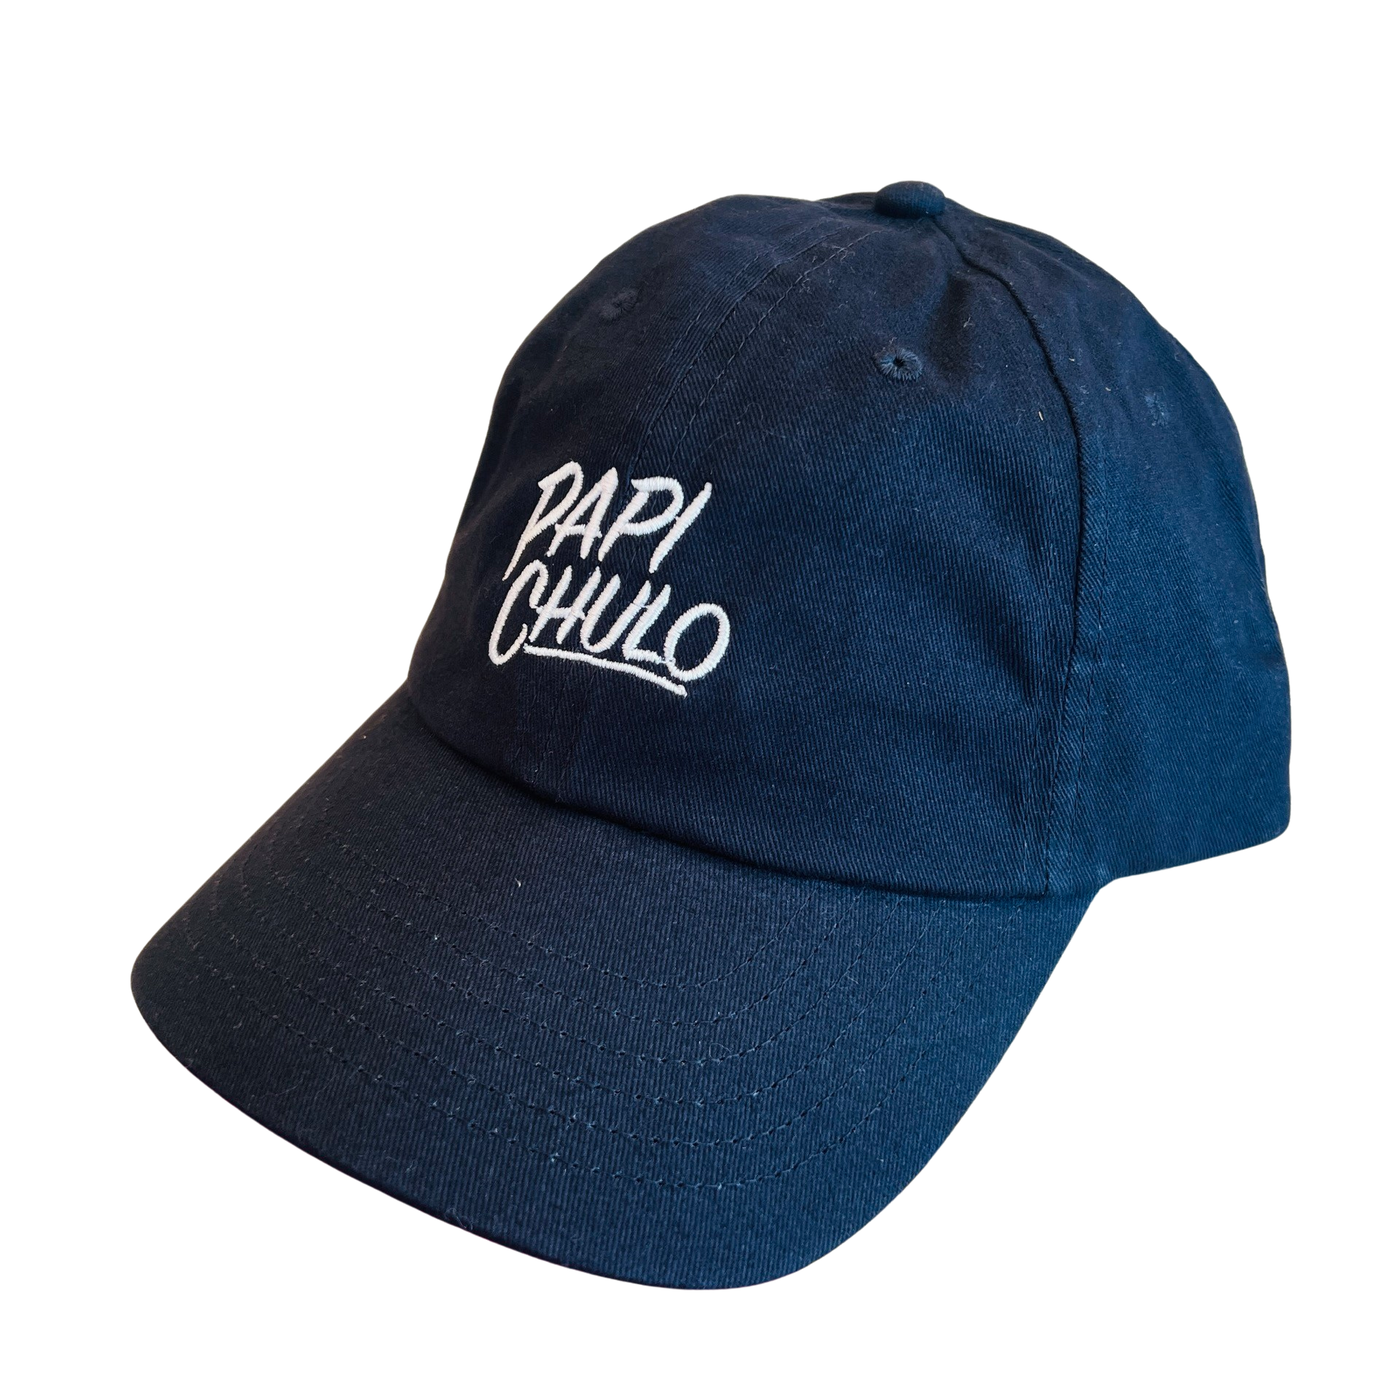 Side view of a dark navy hat with the phrase Papi Chulo in white lettering